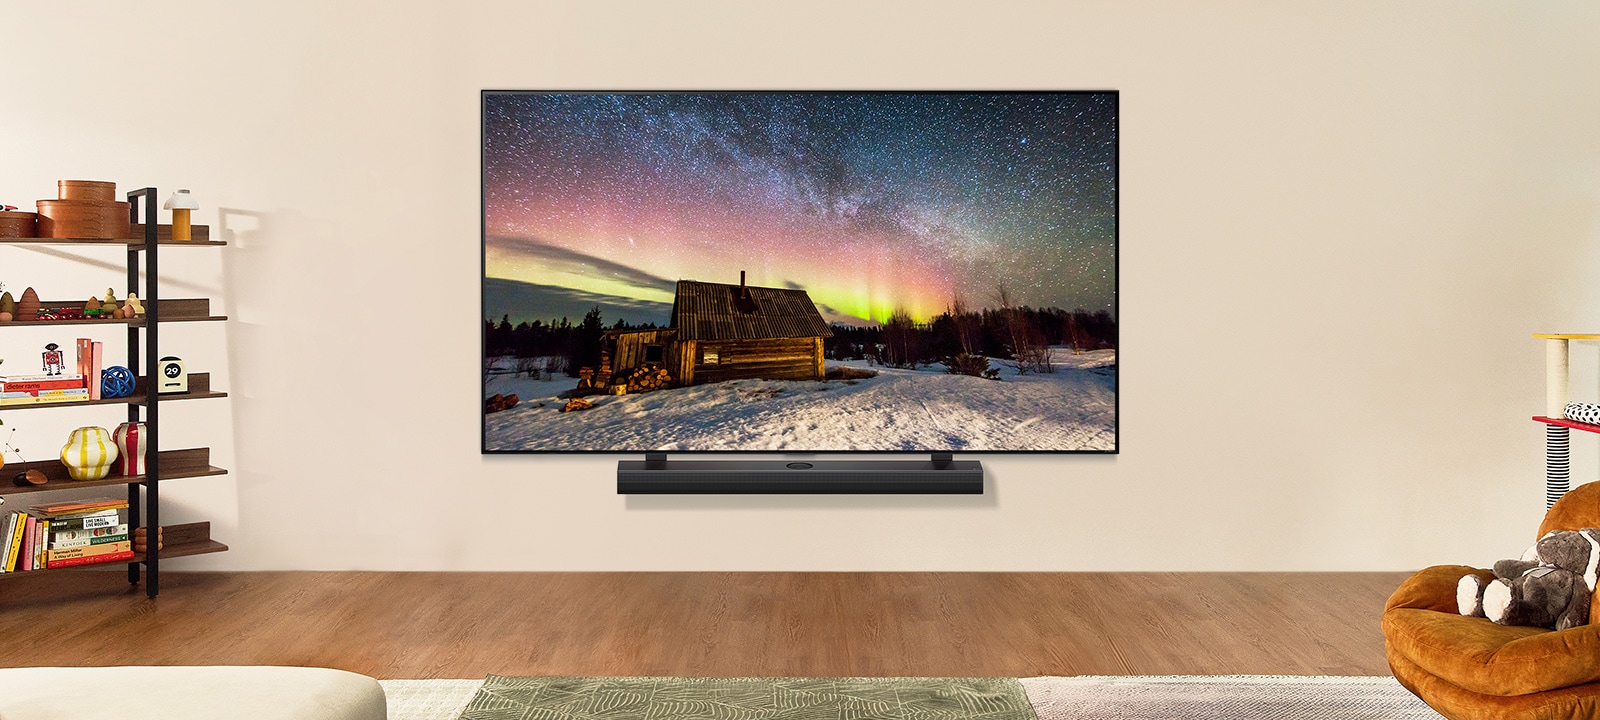 LG TV and LG Soundbar in a modern living space in daytime. The screen image of the aurora borealis is displayed with the ideal brightness levels.	